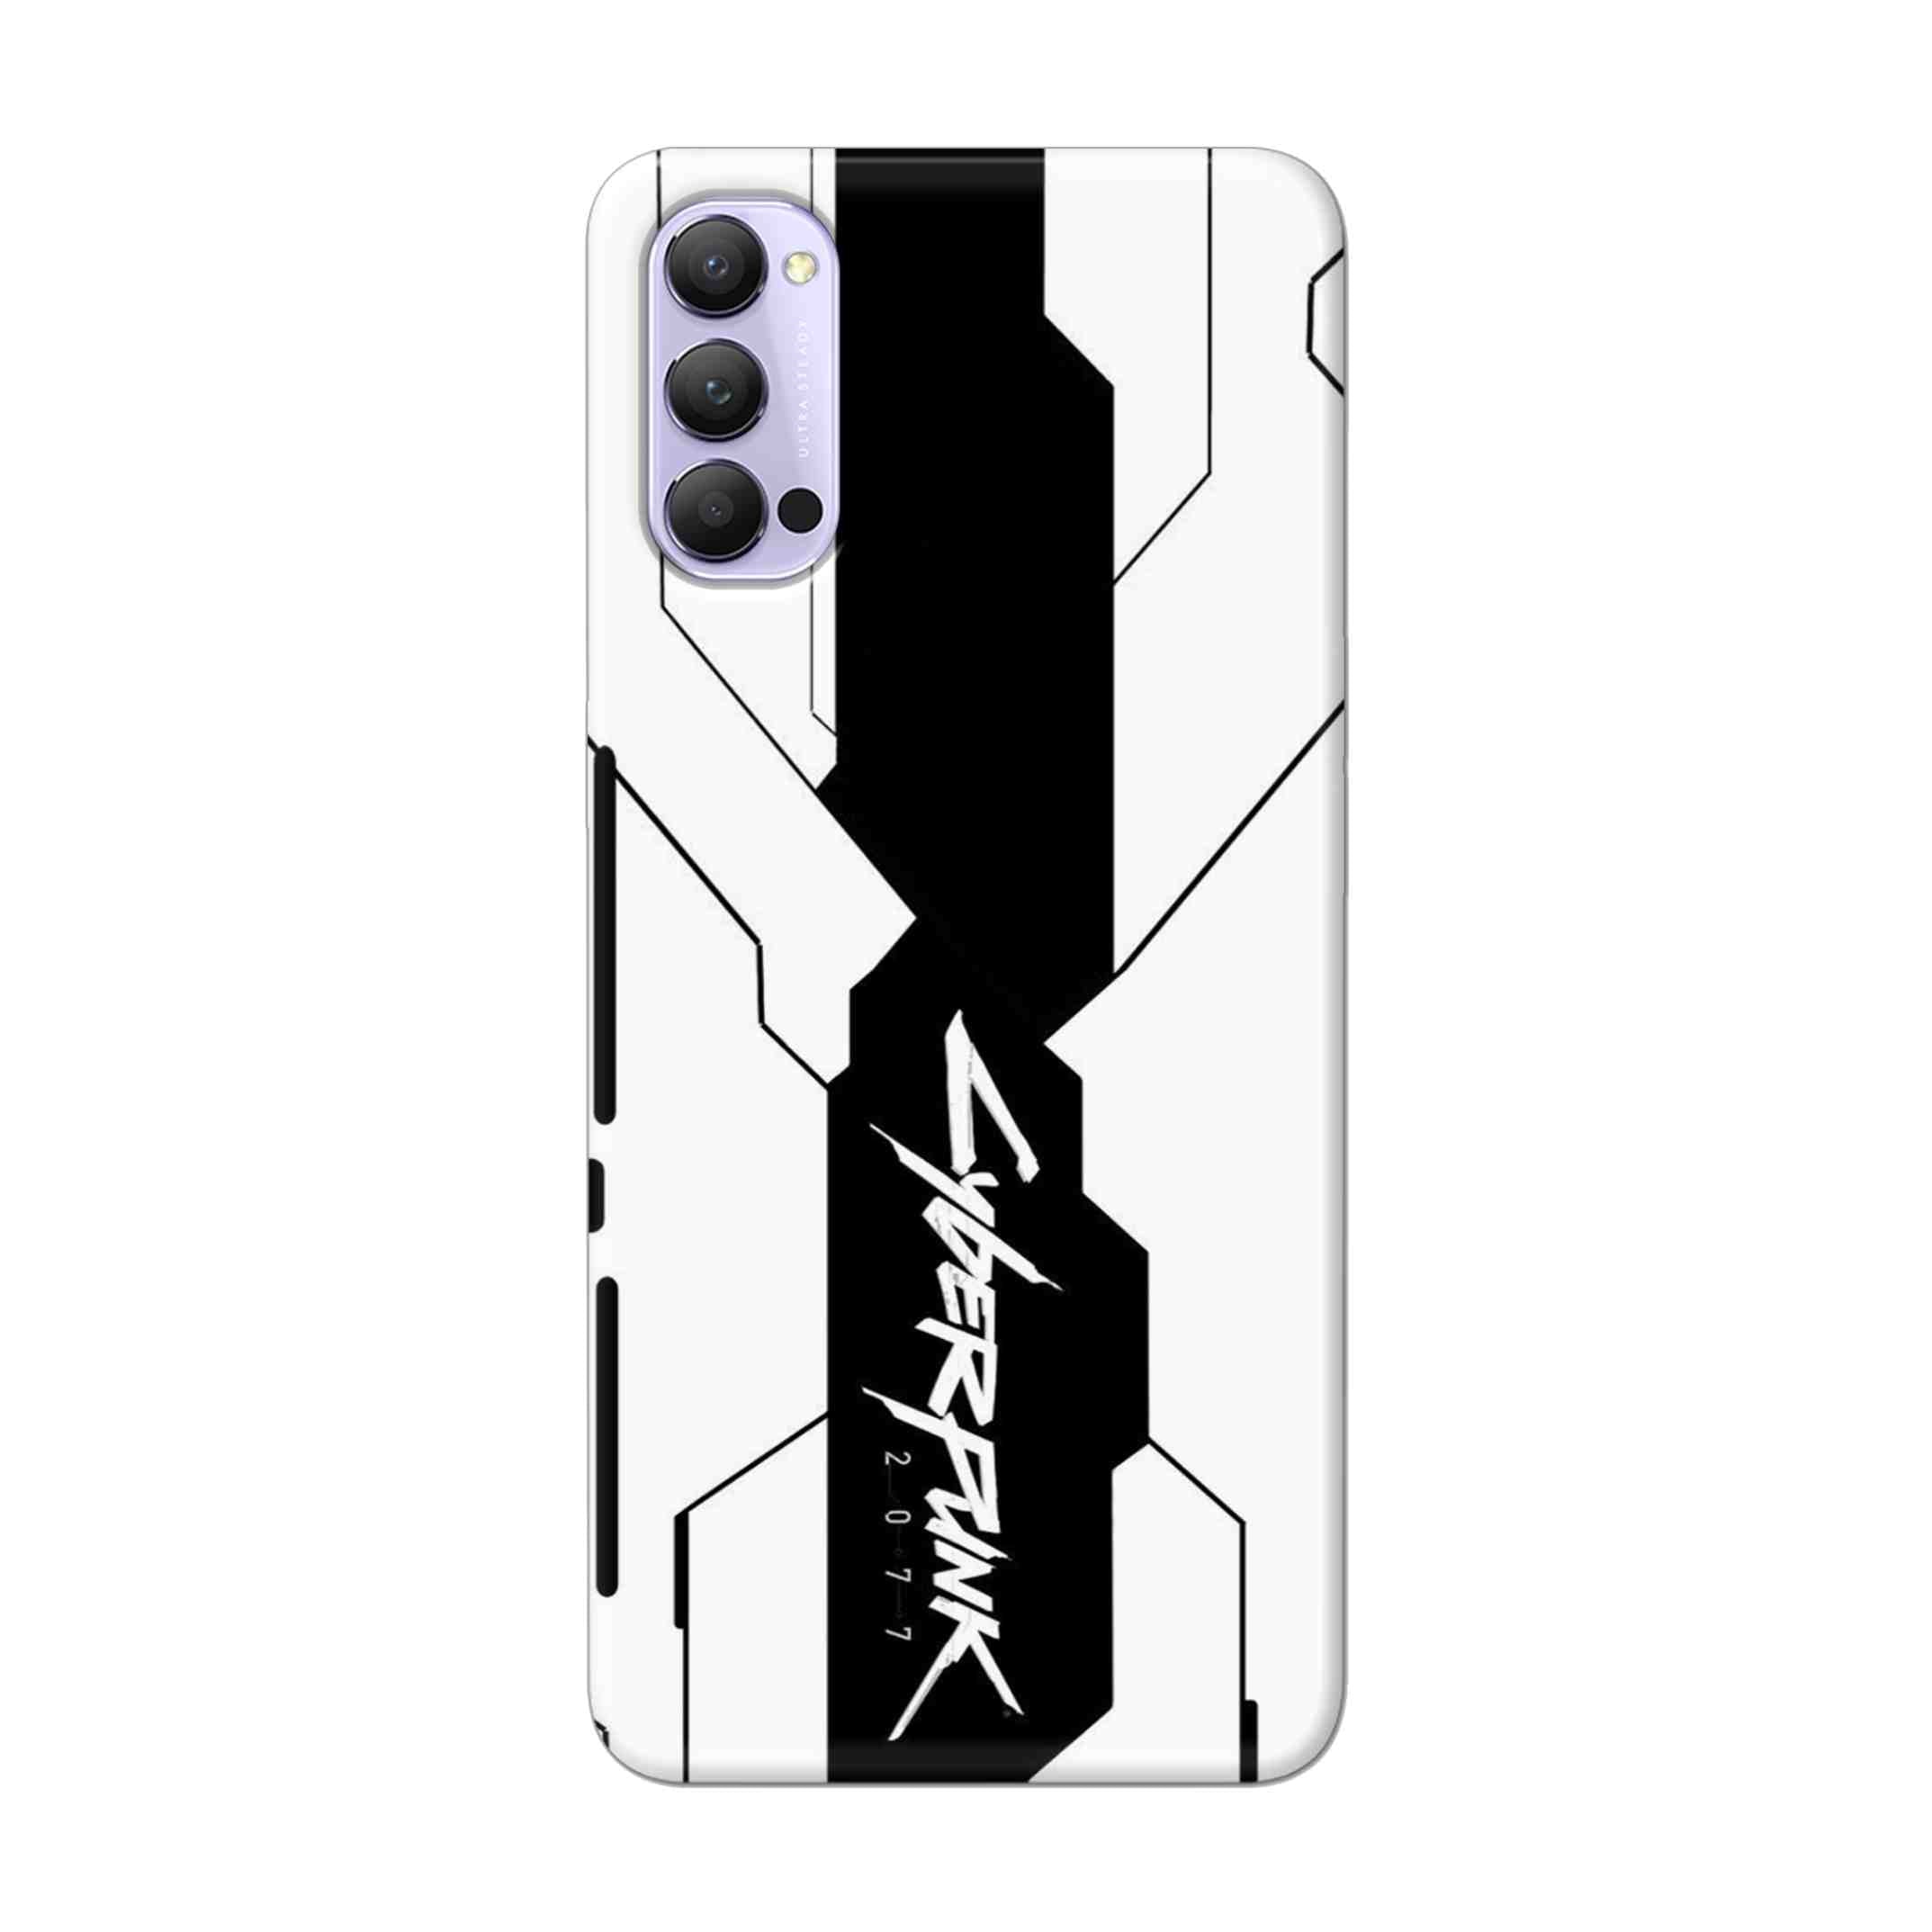 Buy Cyberpunk 2077 Hard Back Mobile Phone Case Cover For Oppo Reno 4 Pro Online